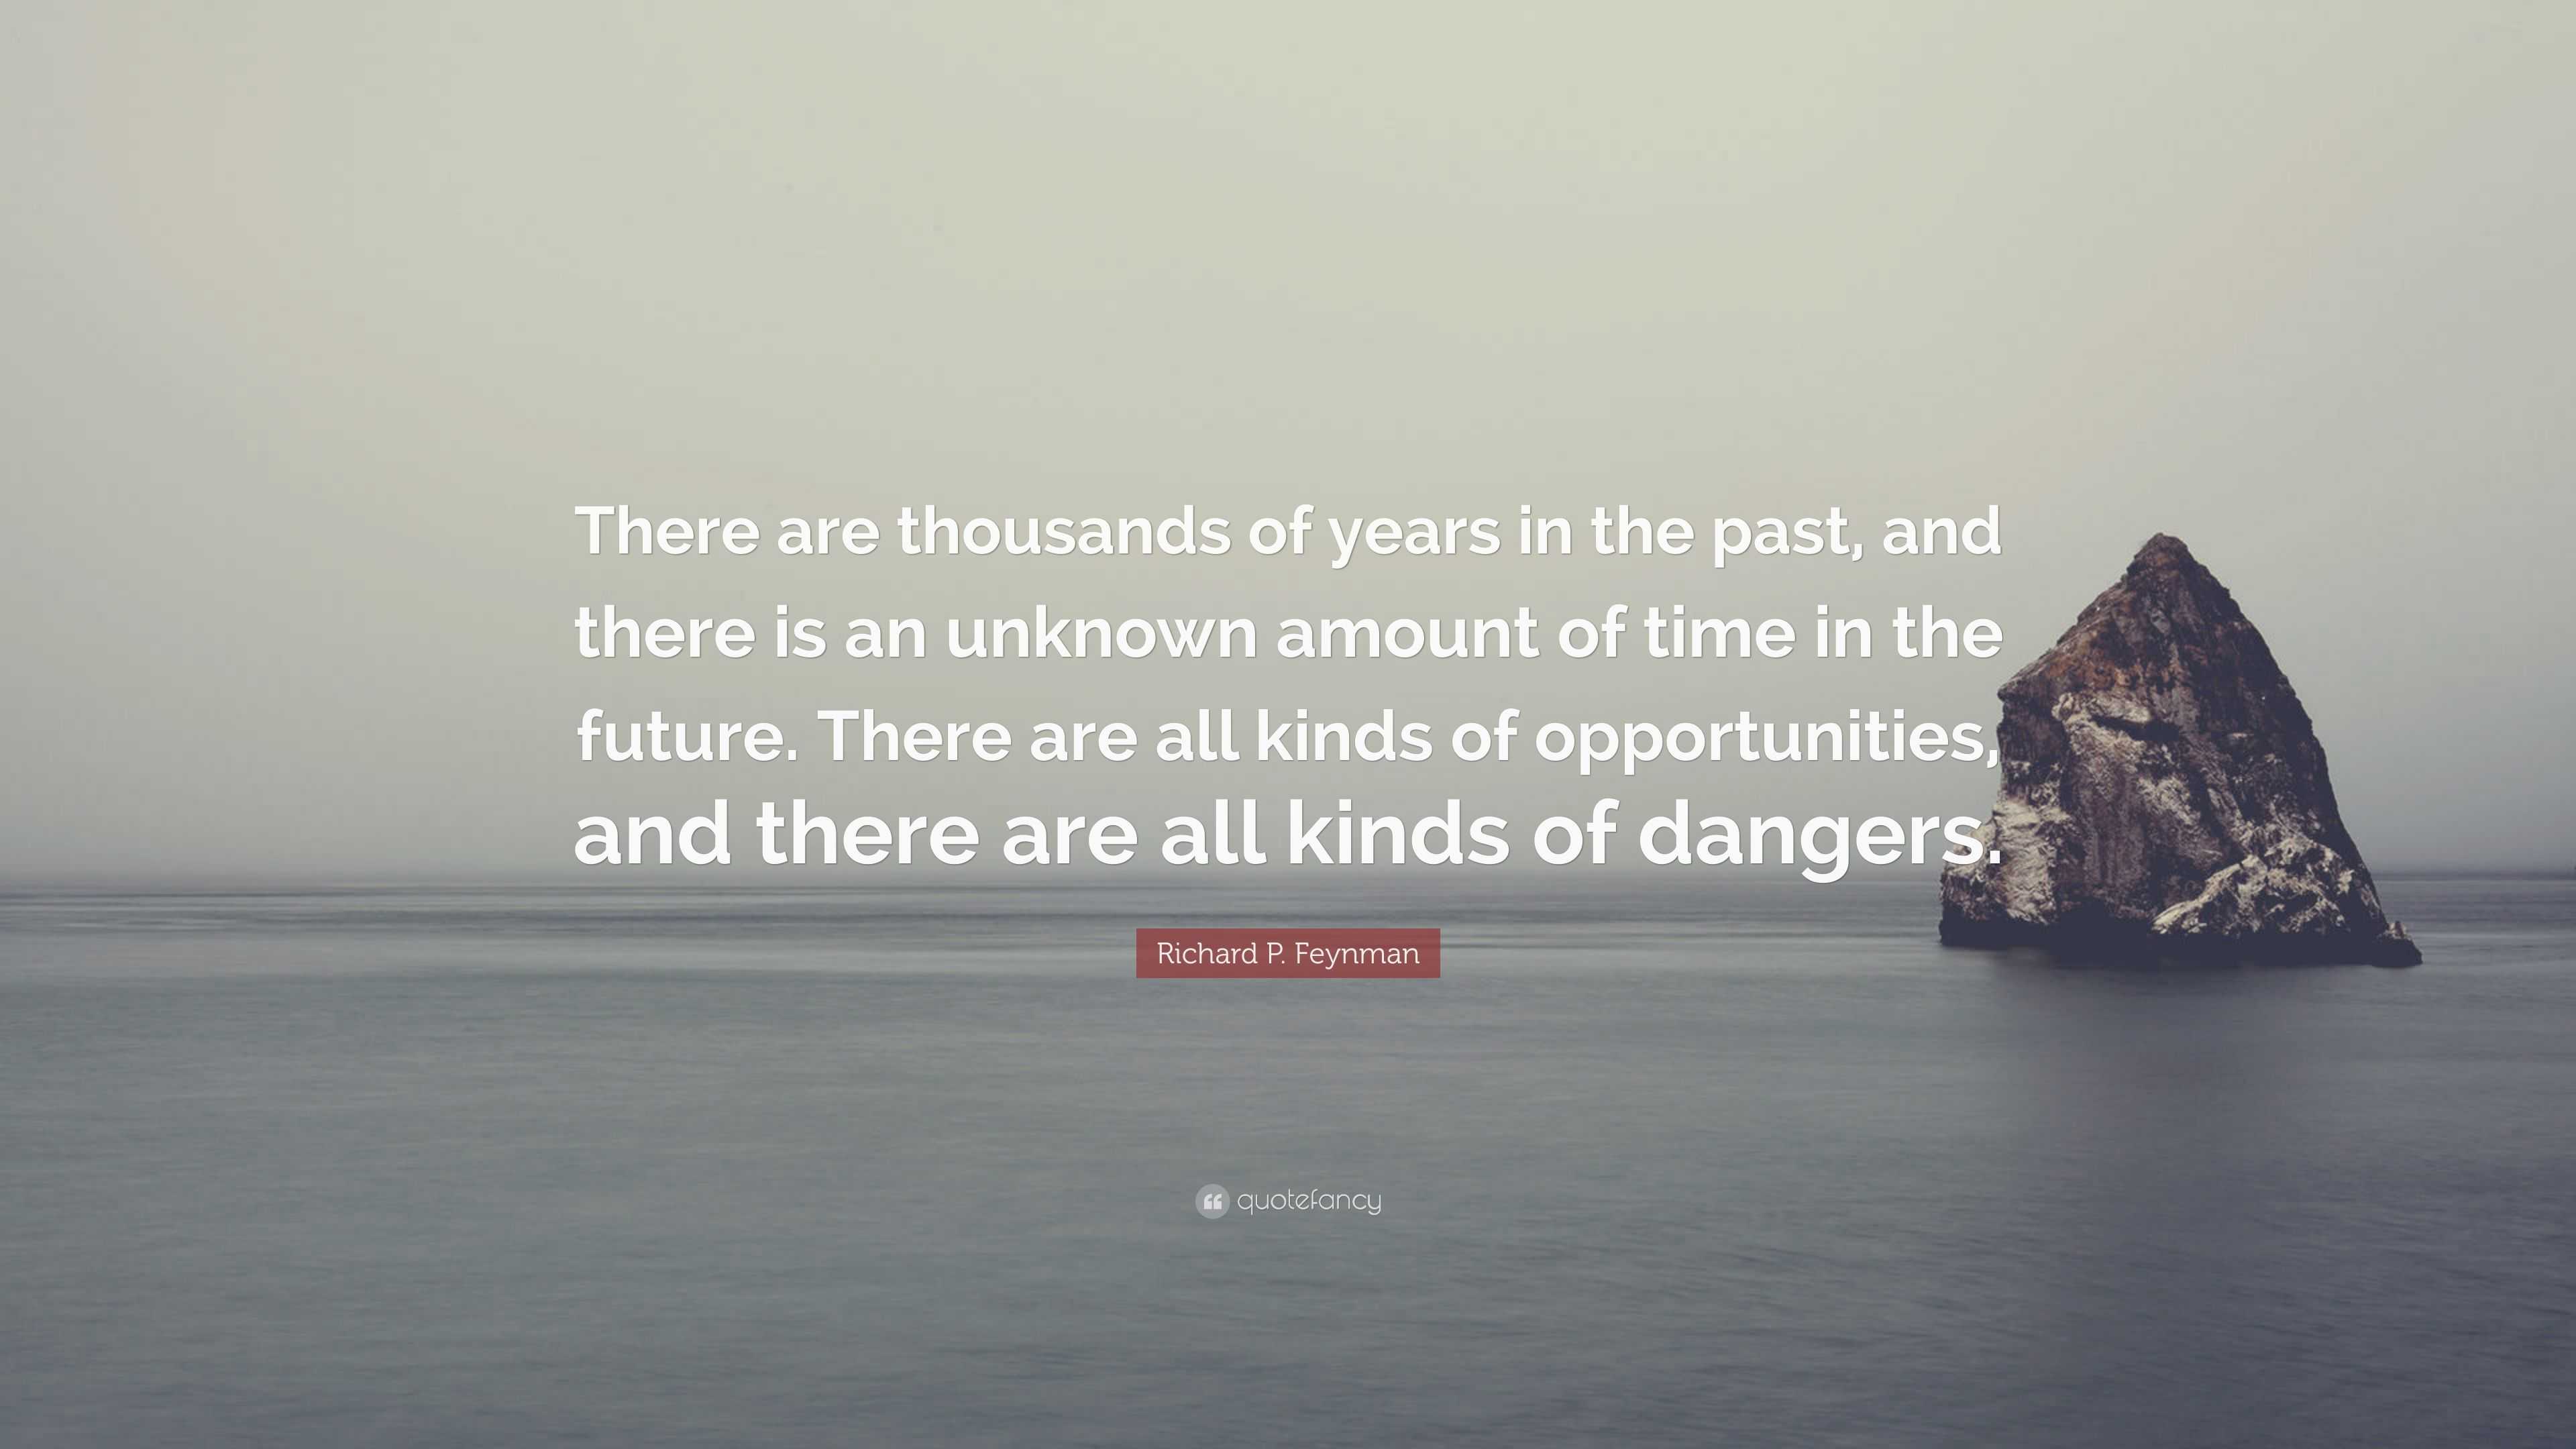 Richard P. Feynman Quote: “There are thousands of years in the past ...